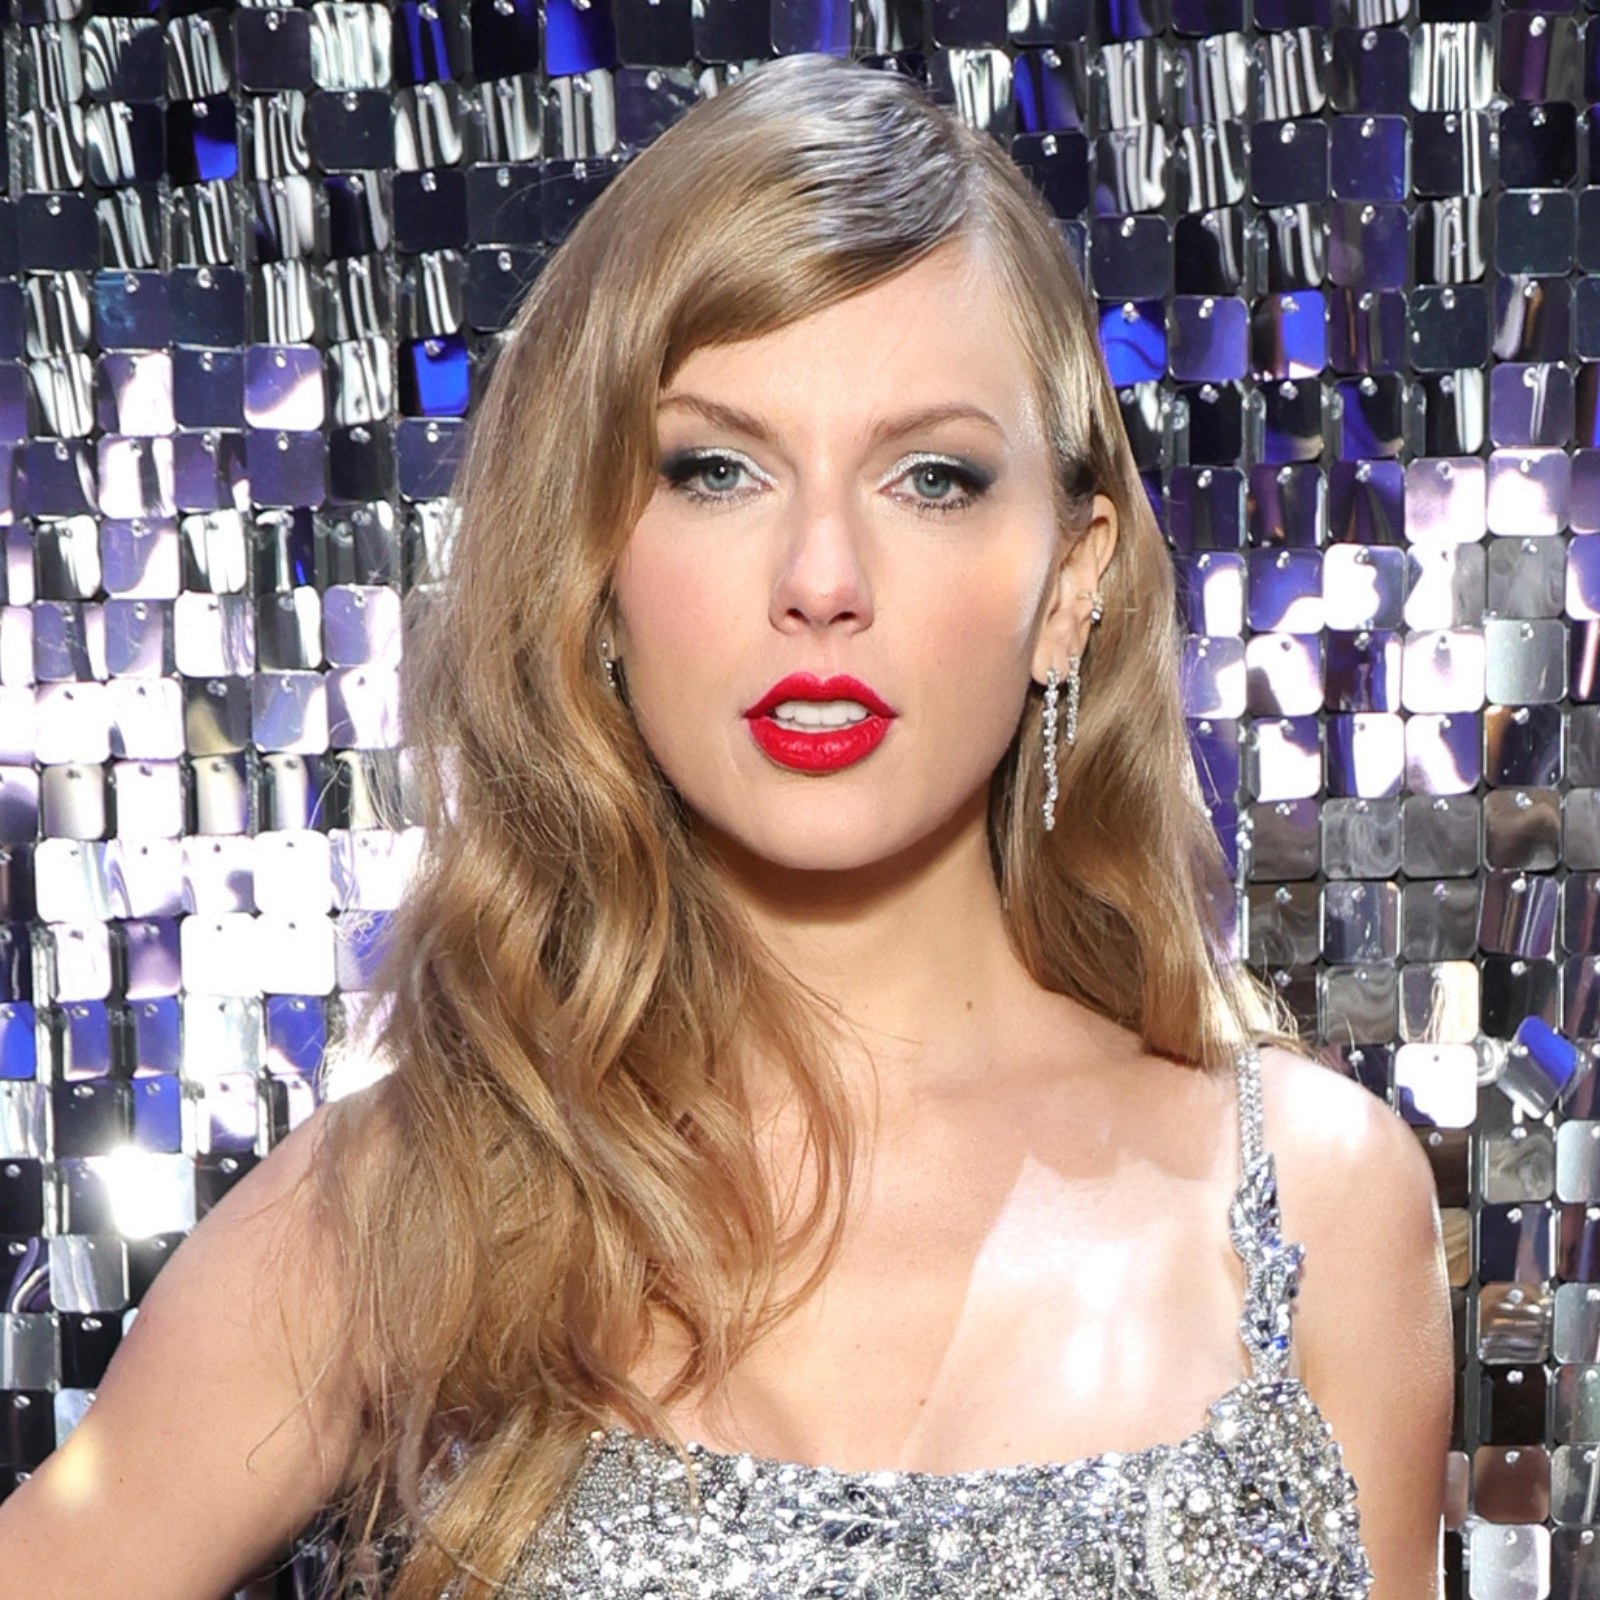 Taylor Swift's Time Cover Slammed in Viral Post